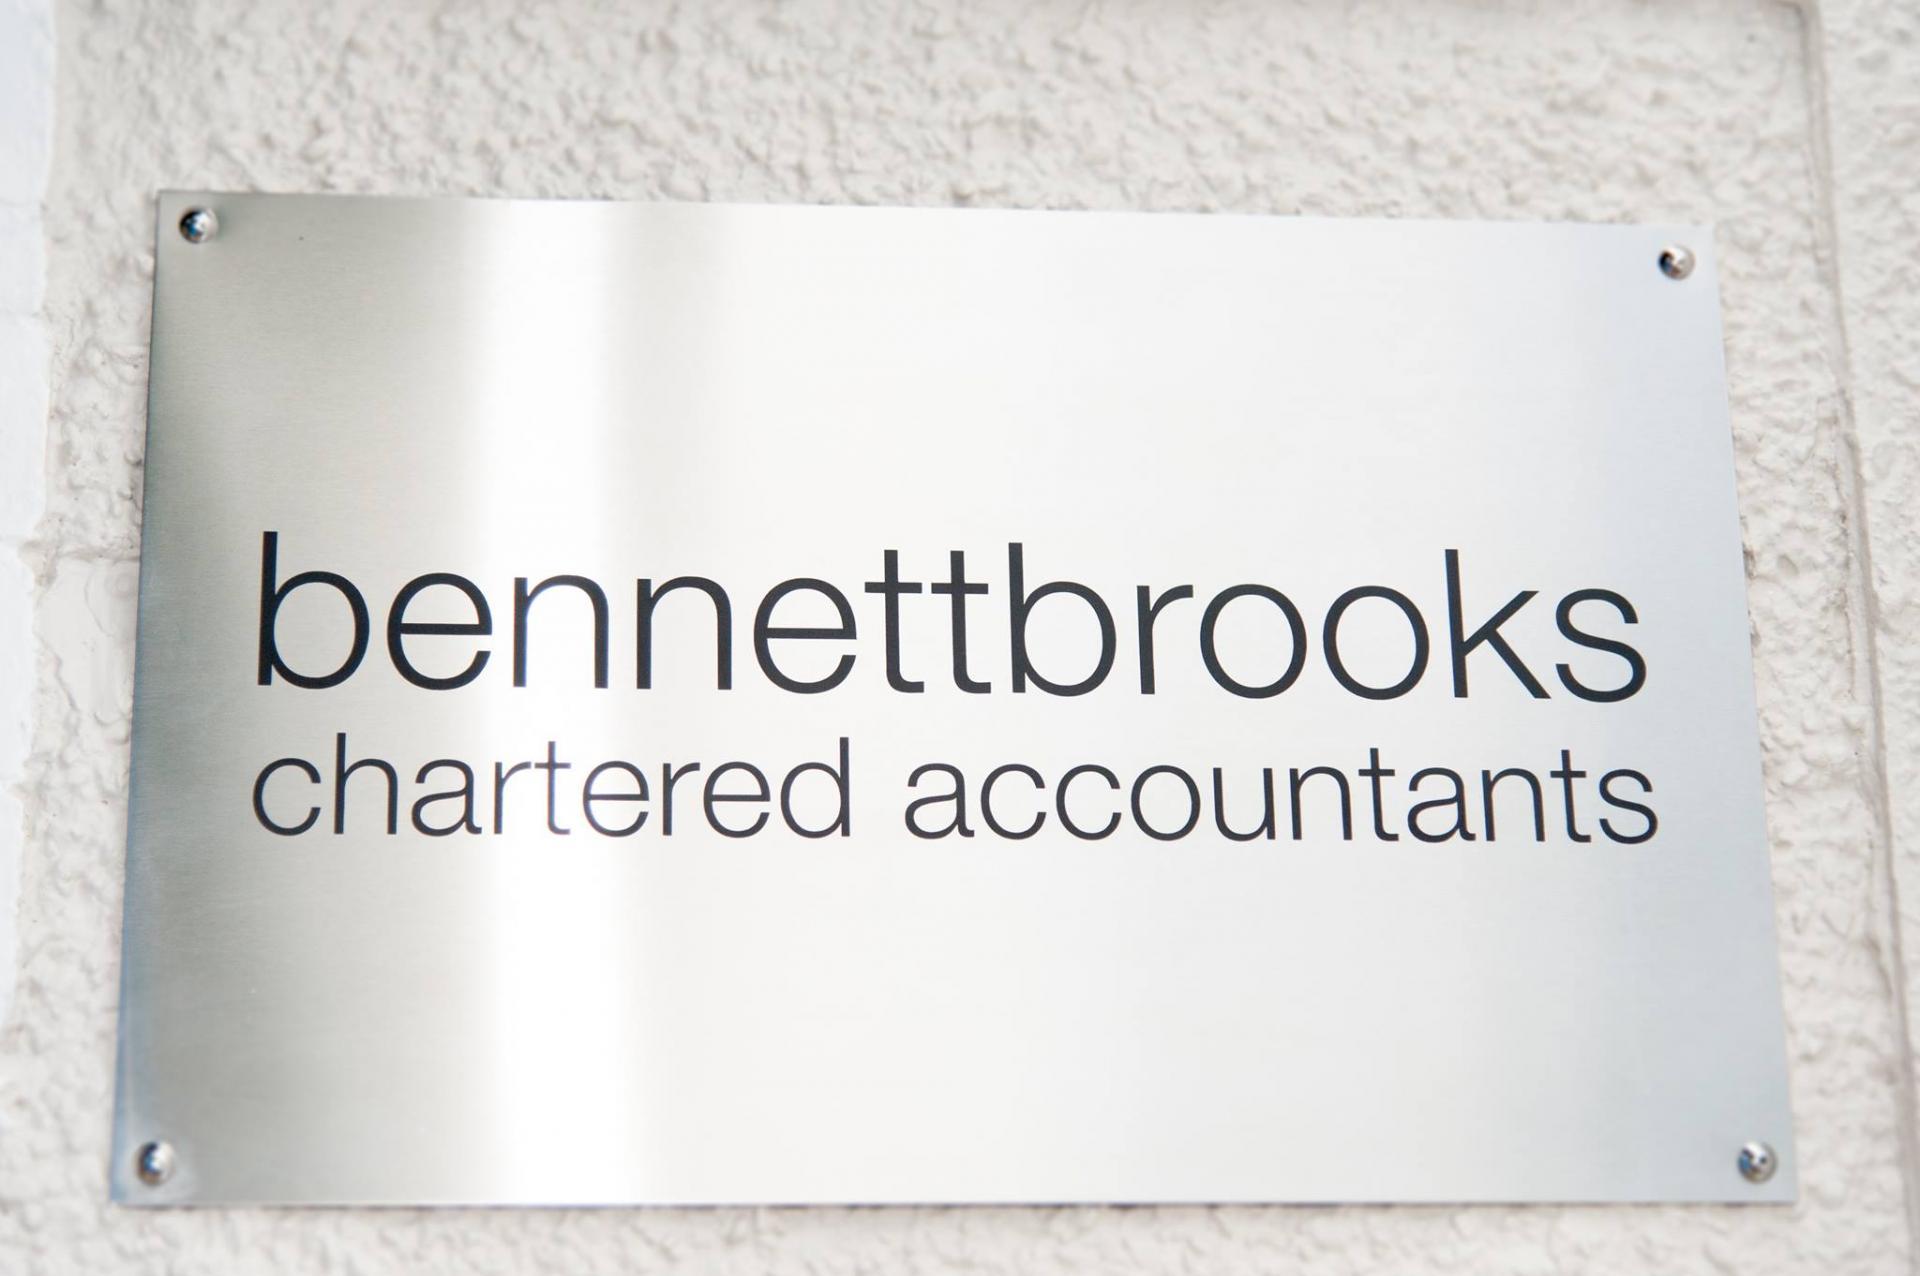 North West accountancy makes third acquisition in 16 months 